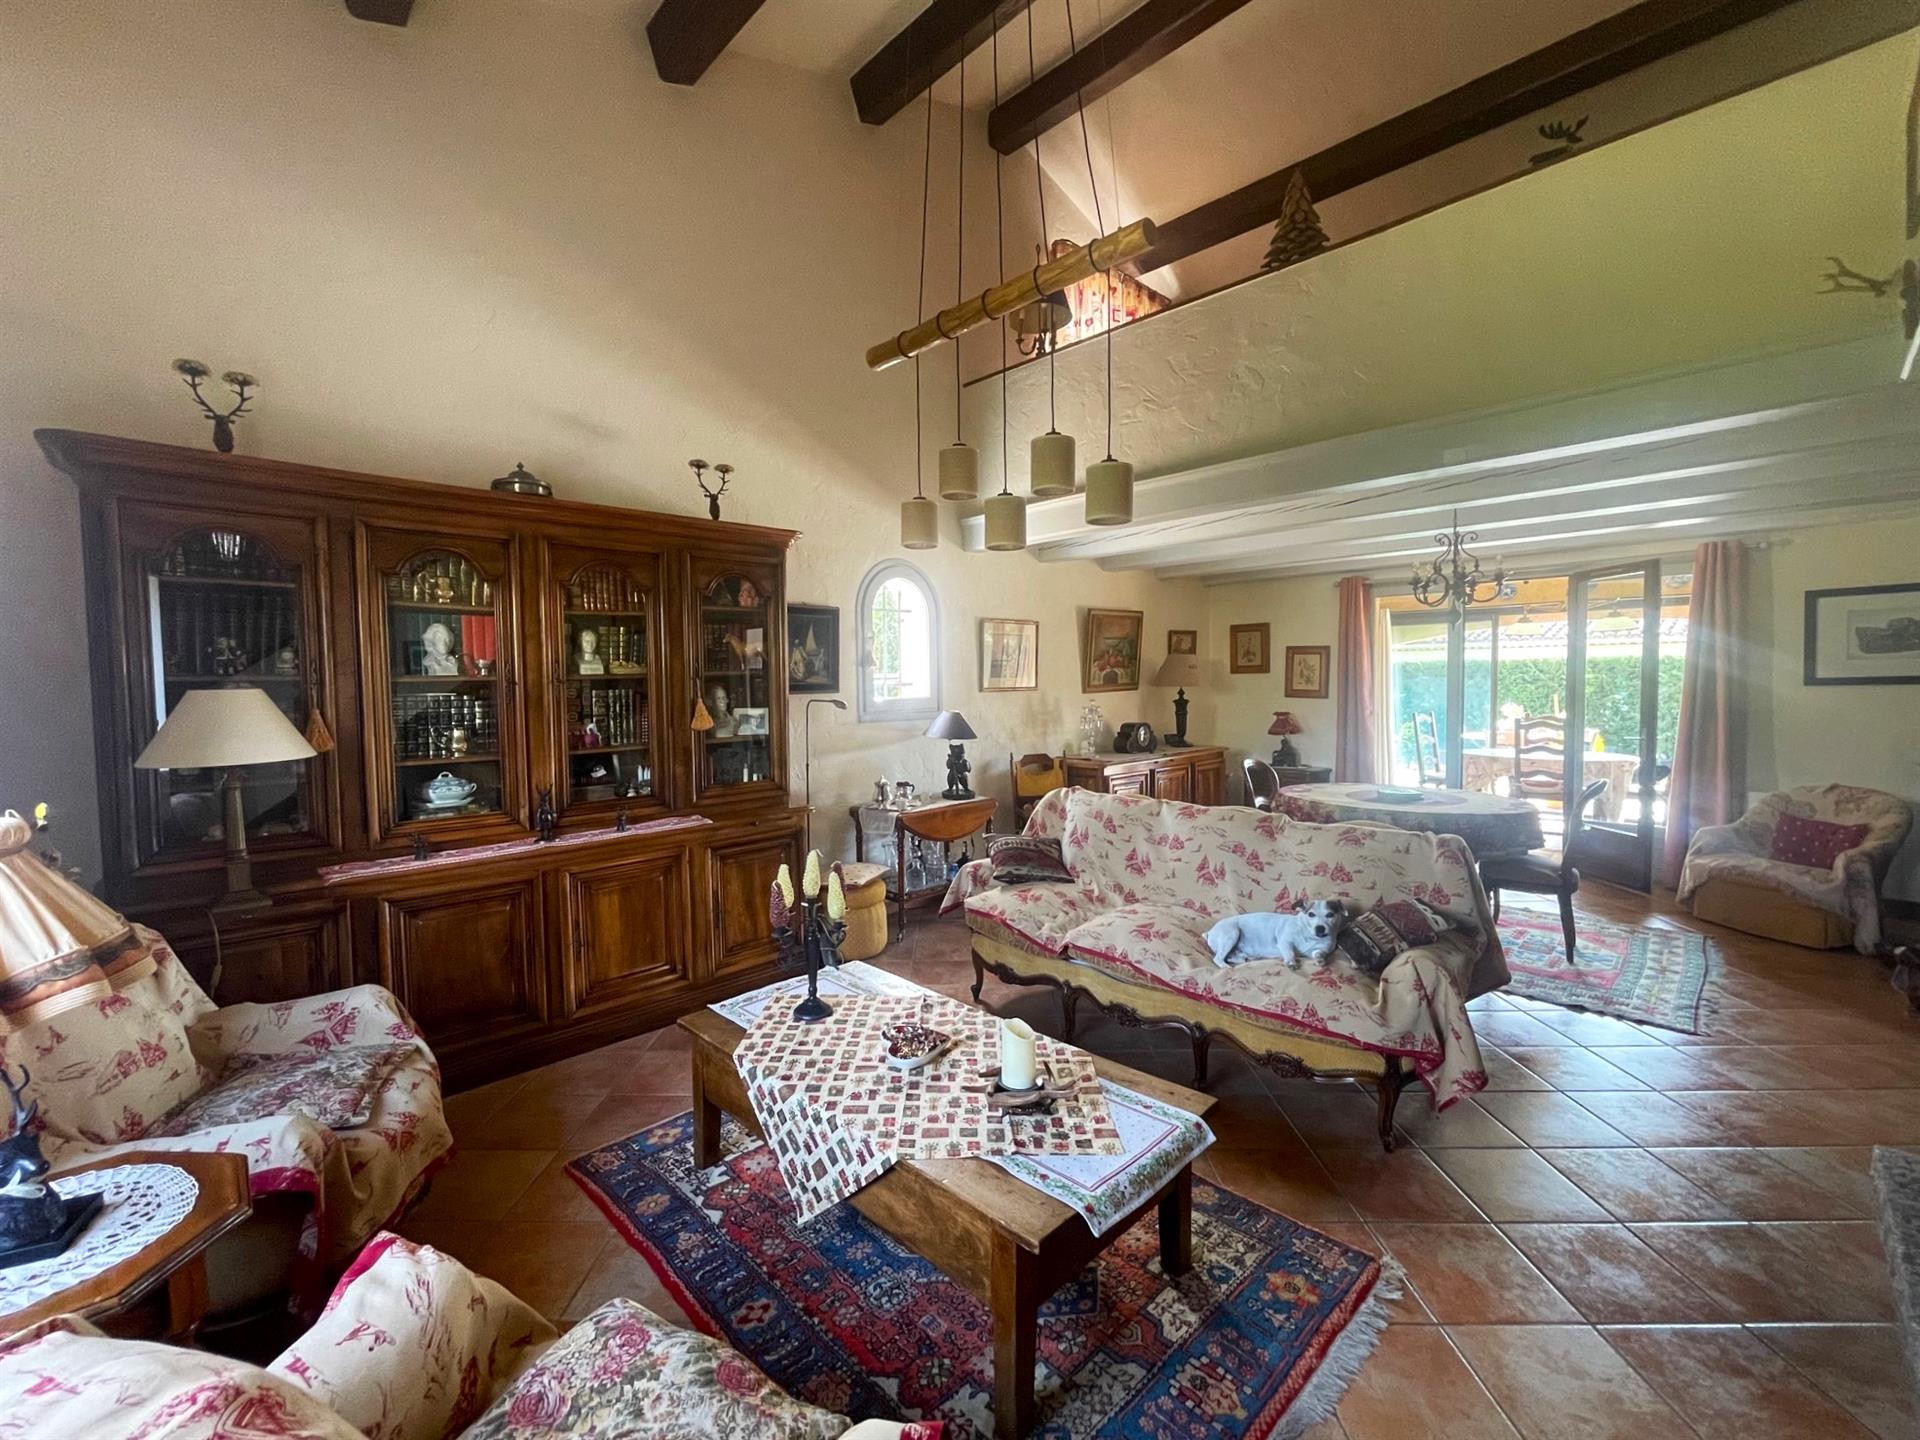 Pretty traditional villa with 3-4 bedrooms, swimming pool, garage, in a quiet location close to the 